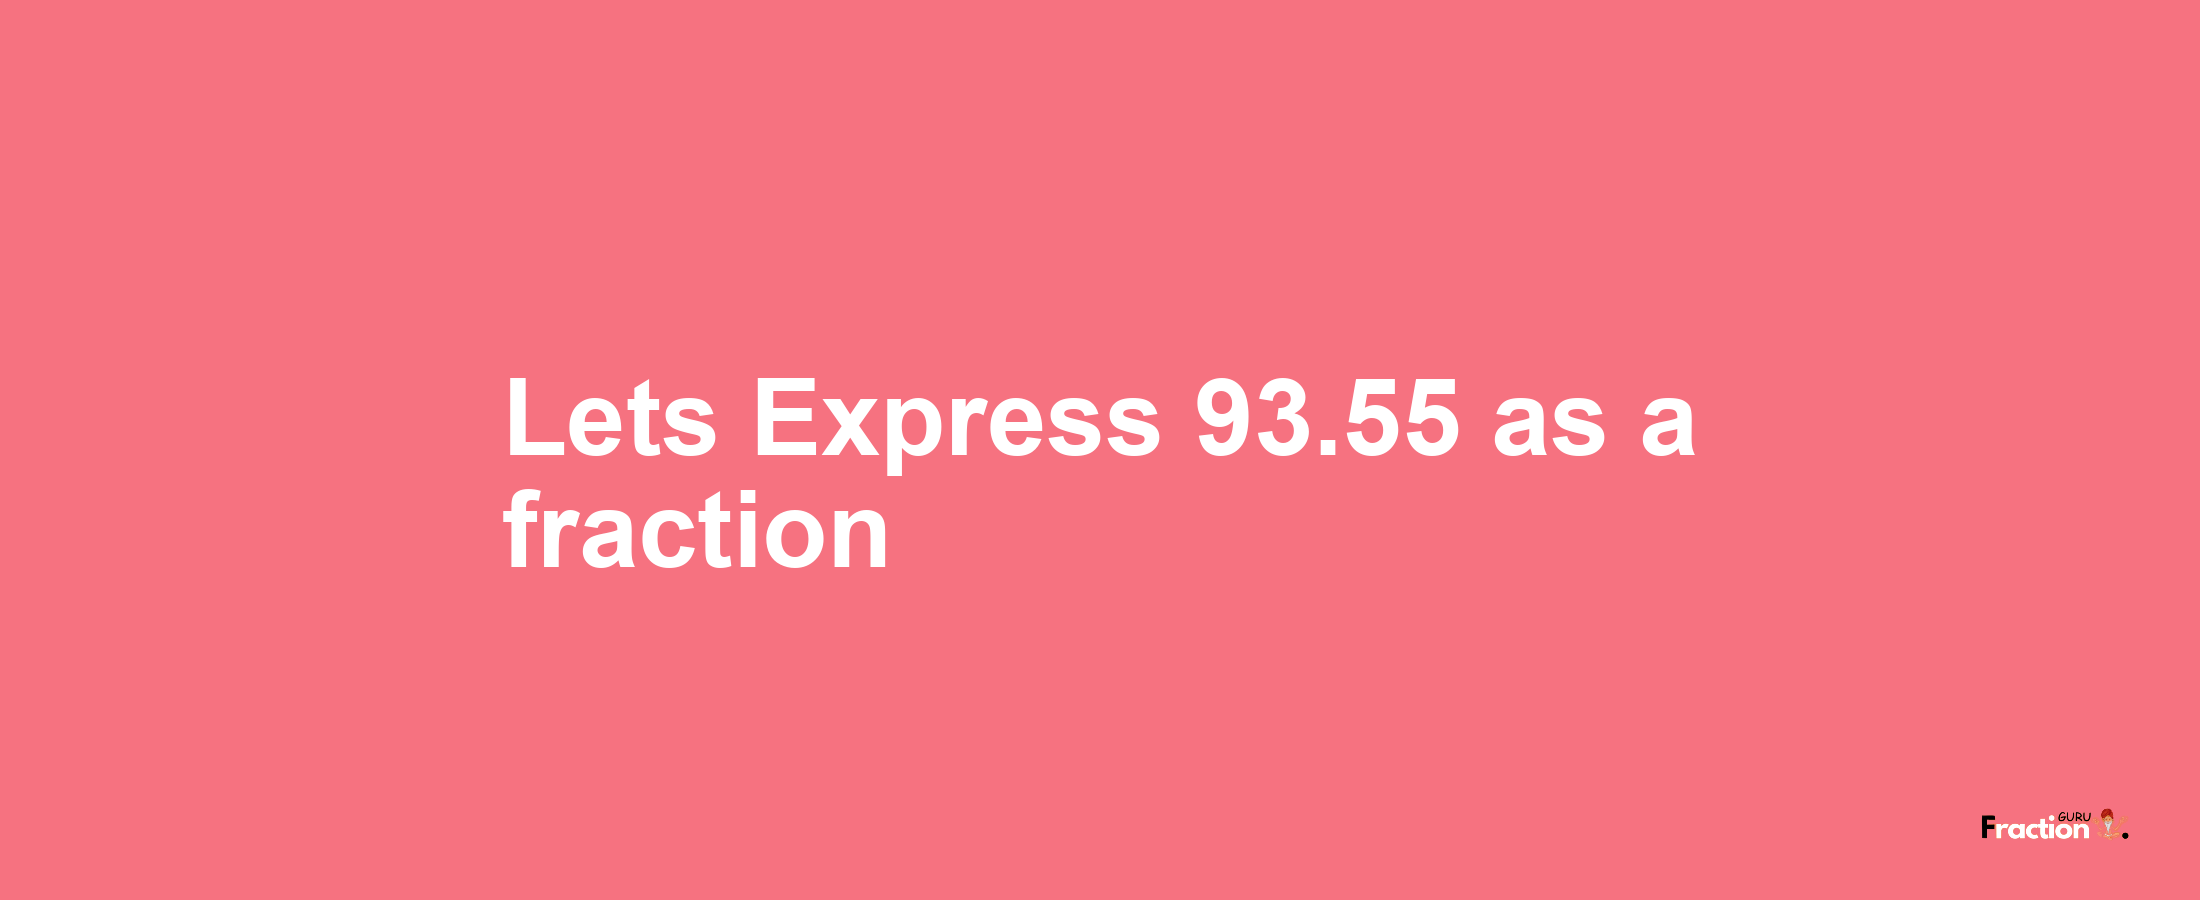 Lets Express 93.55 as afraction